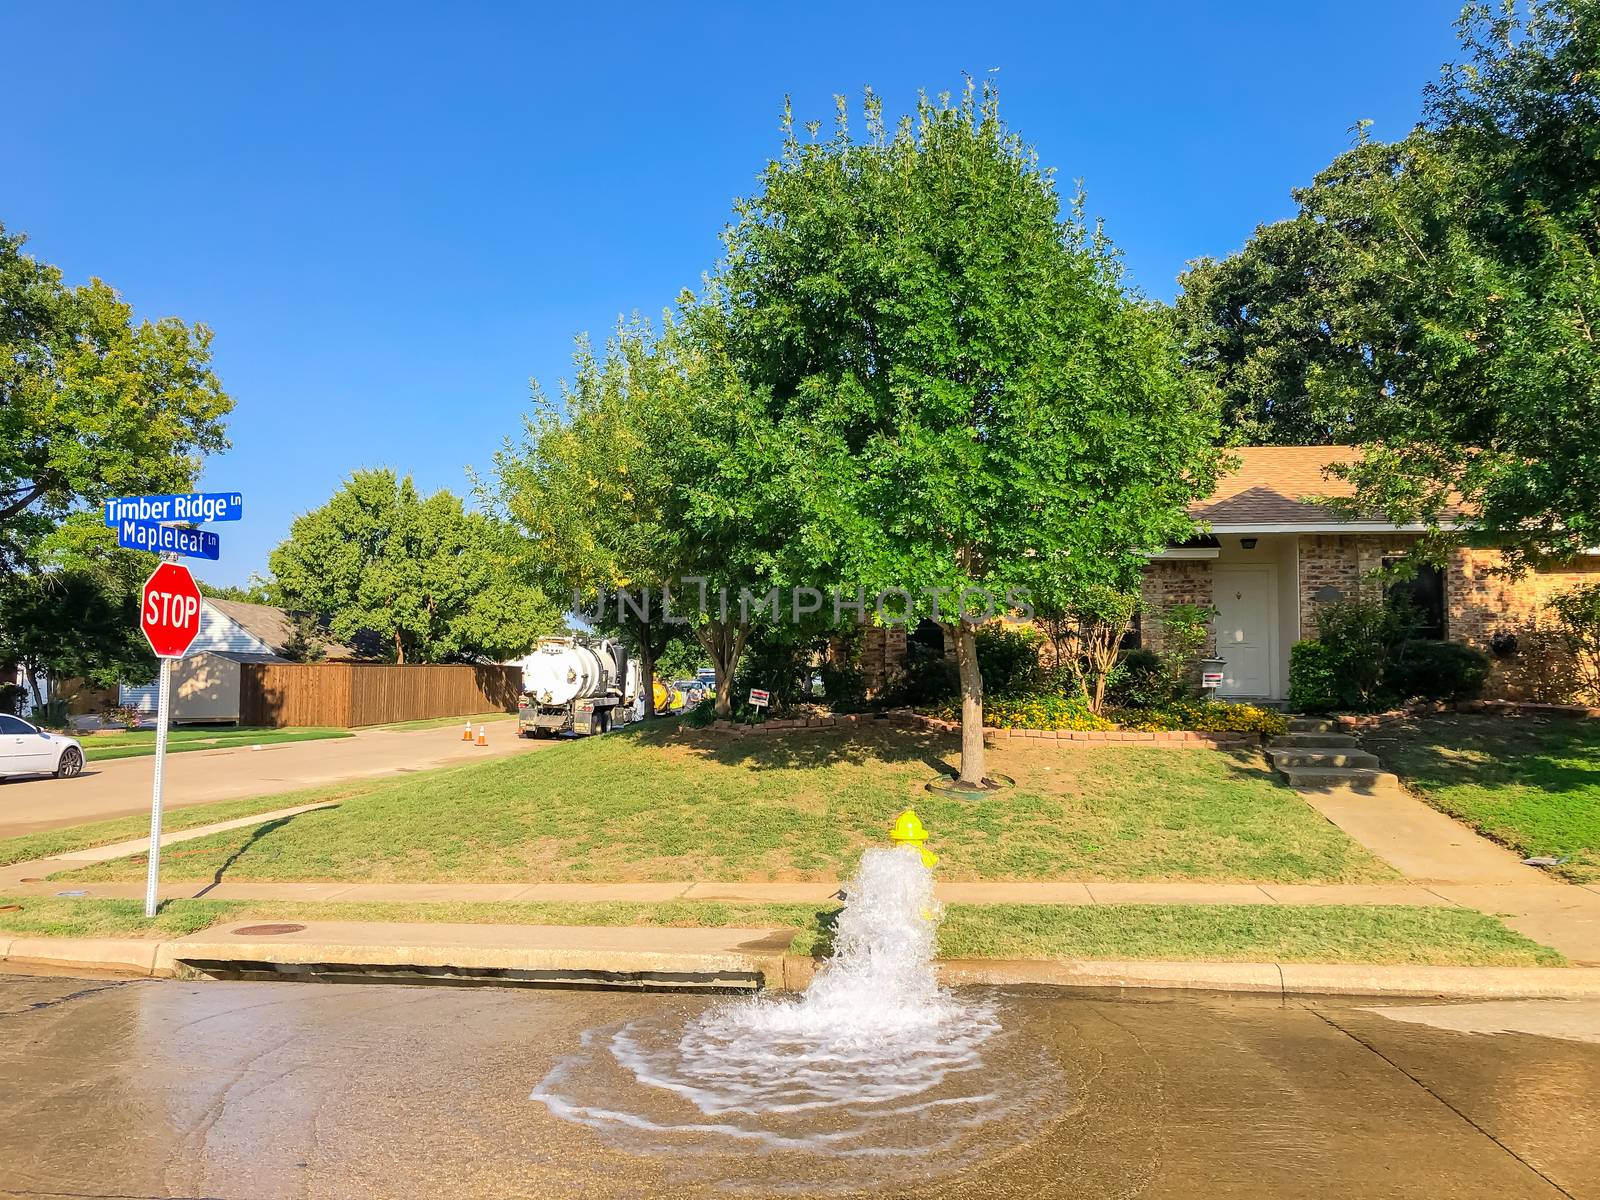 Typical neighborhood area with stop sign near Dallas, Texas, America with open yellow fire hydrant gushing water across a residential street. Row of suburban bungalow single family house behind